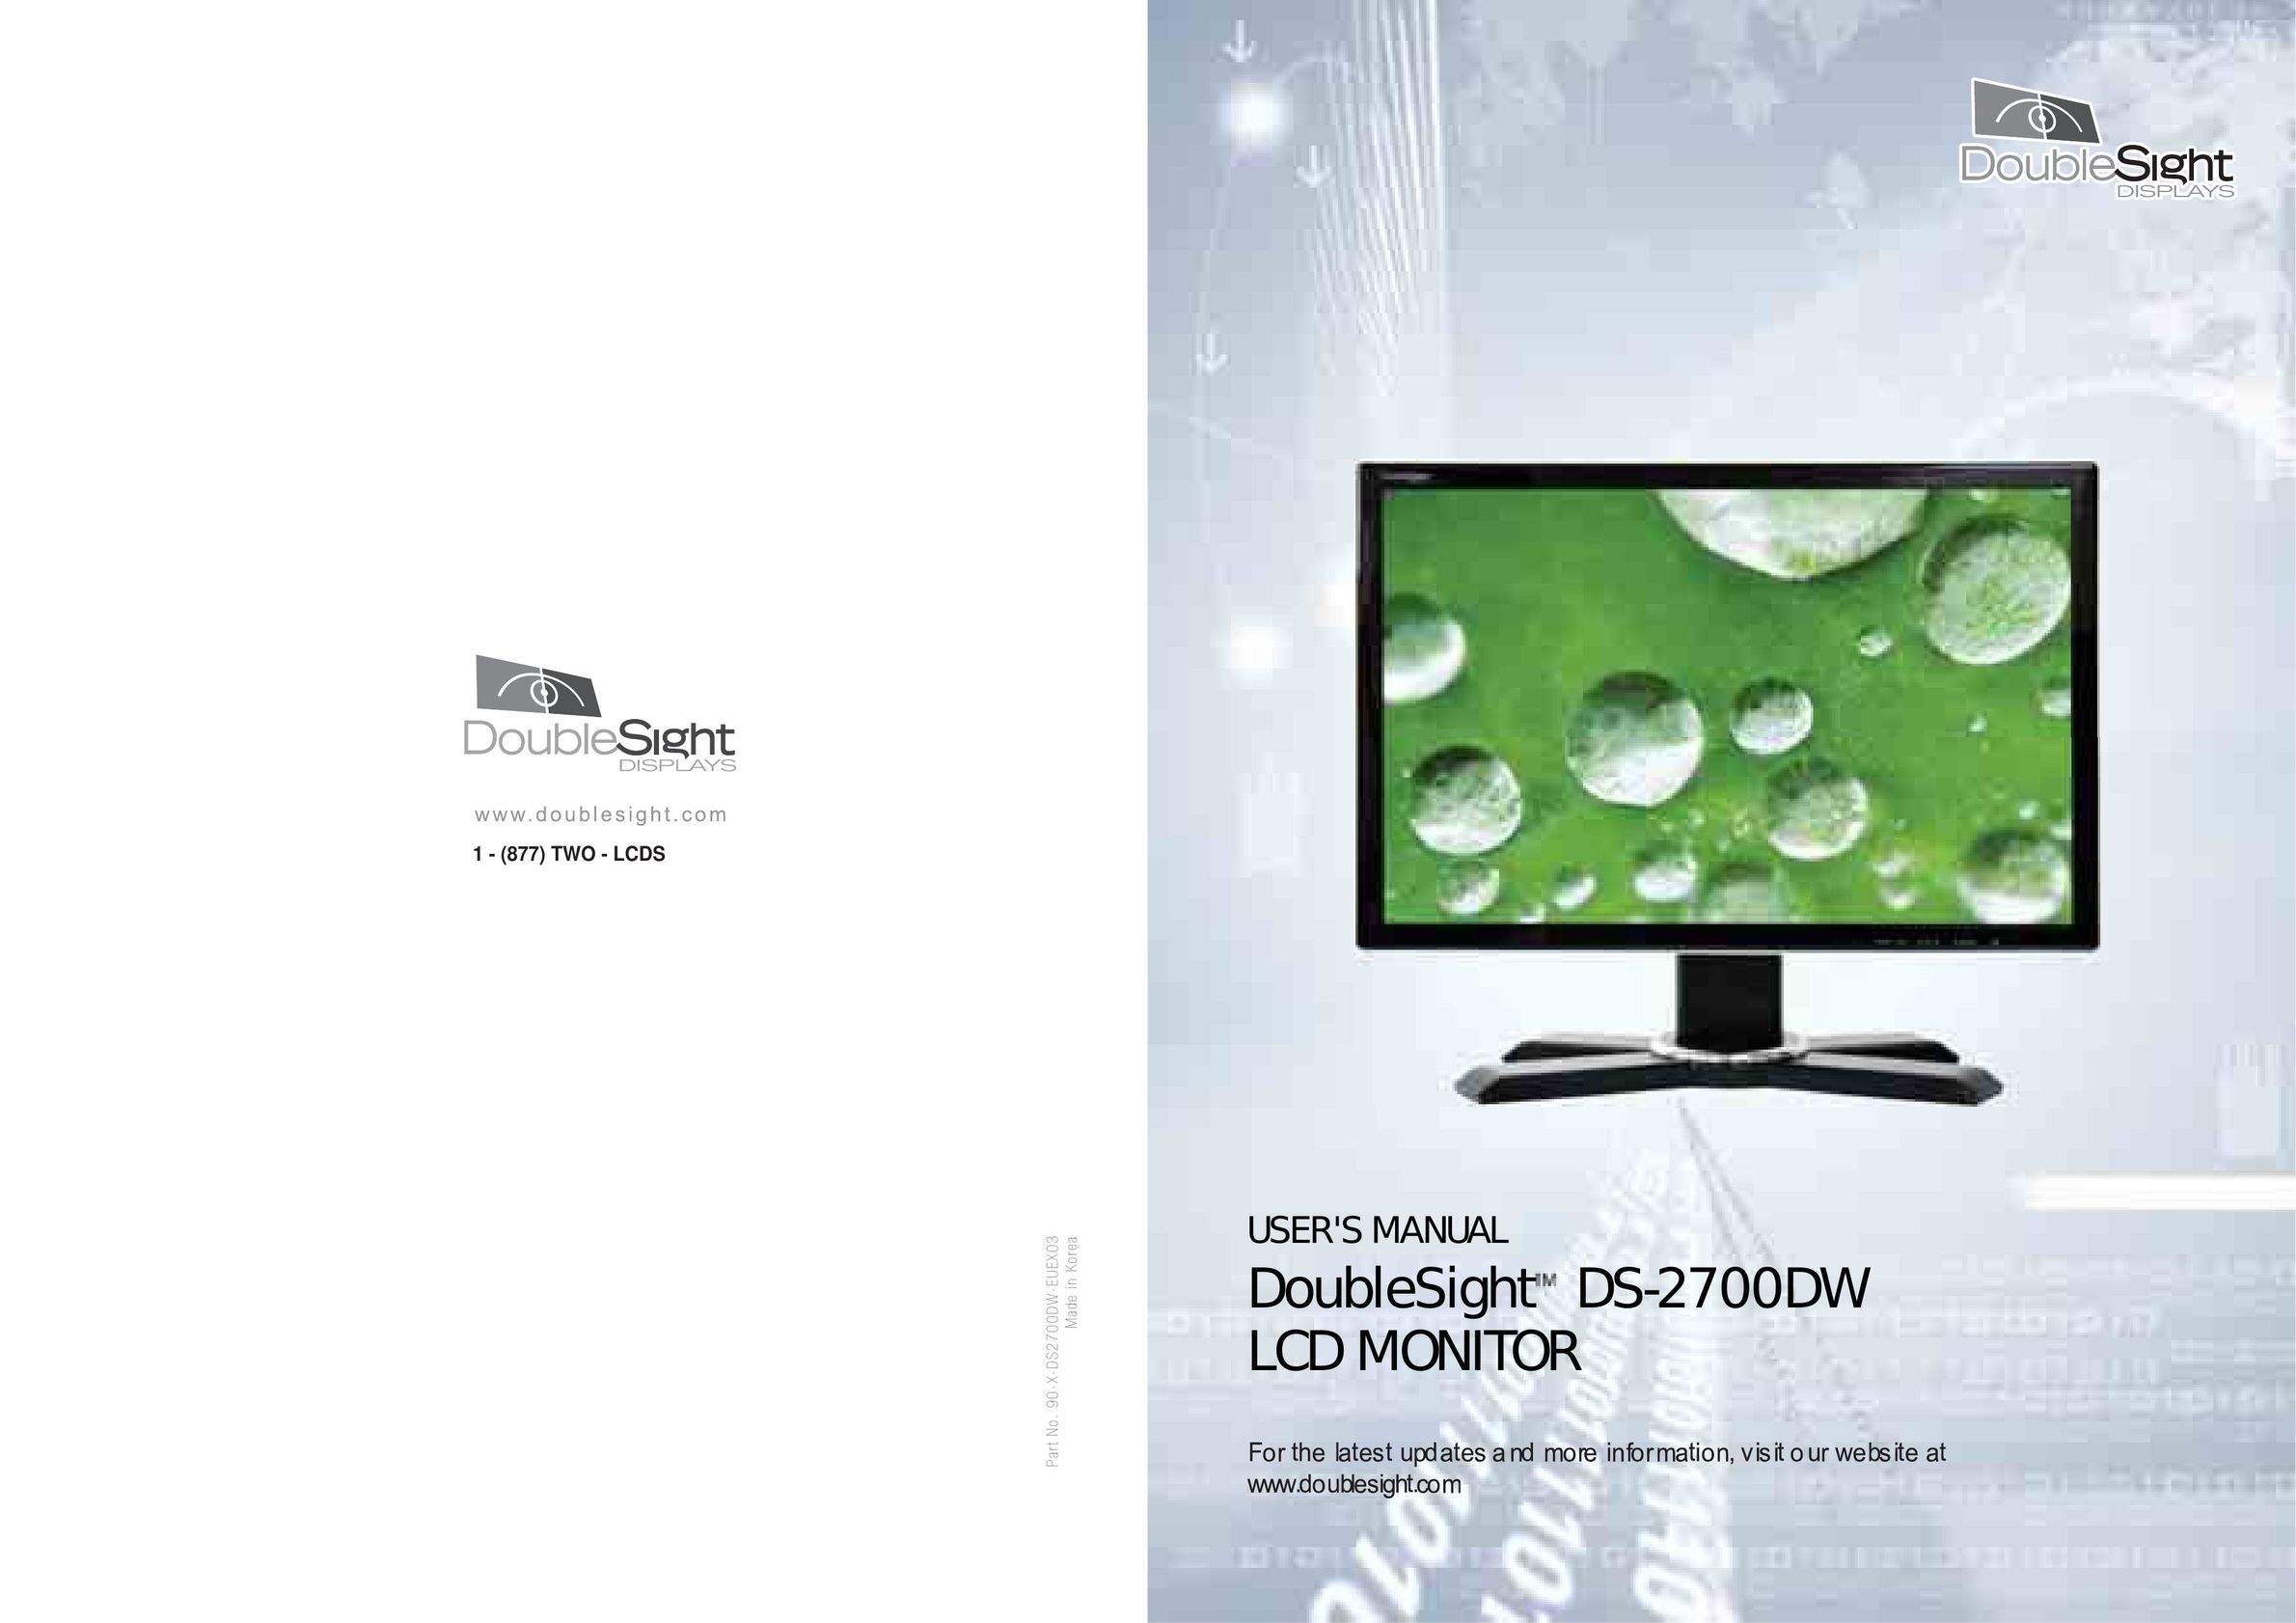 DoubleSight Displays DS-2700DW Computer Monitor User Manual